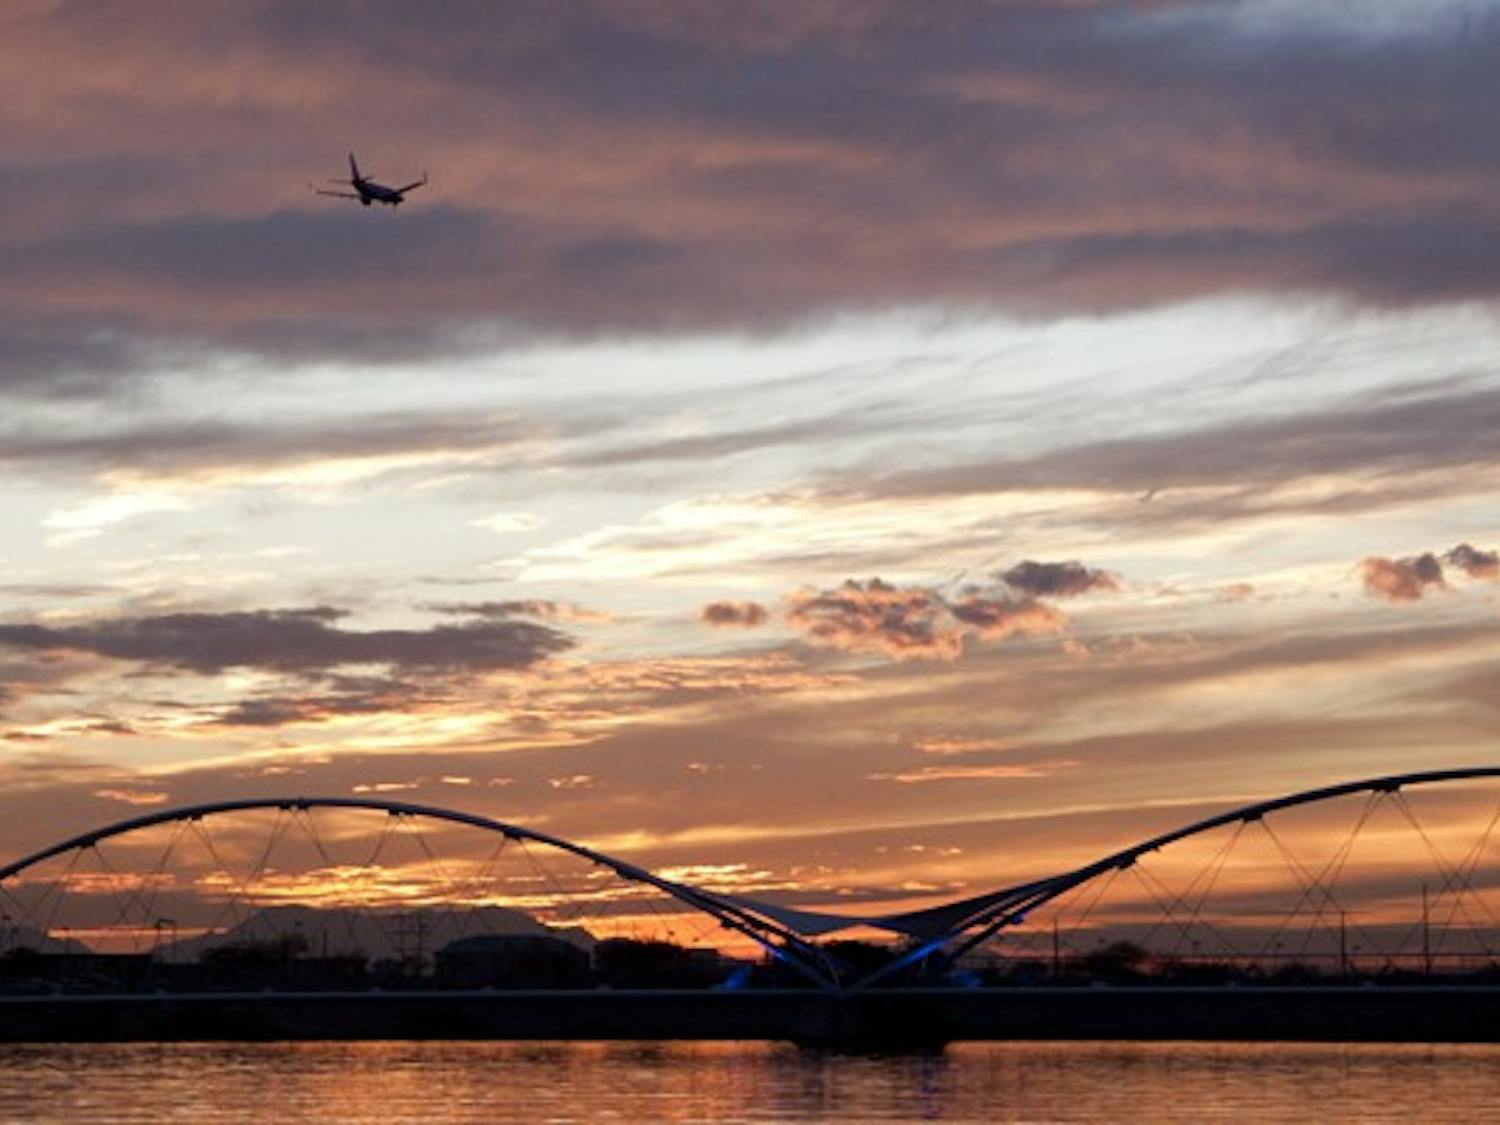 A plane flies over Tempe Town Lake towards Sky Harbor as the sun sets. The Tempe City Council has been dealing with noise complaints from air traffic. (Photo by Abhiram Chandrashekar)